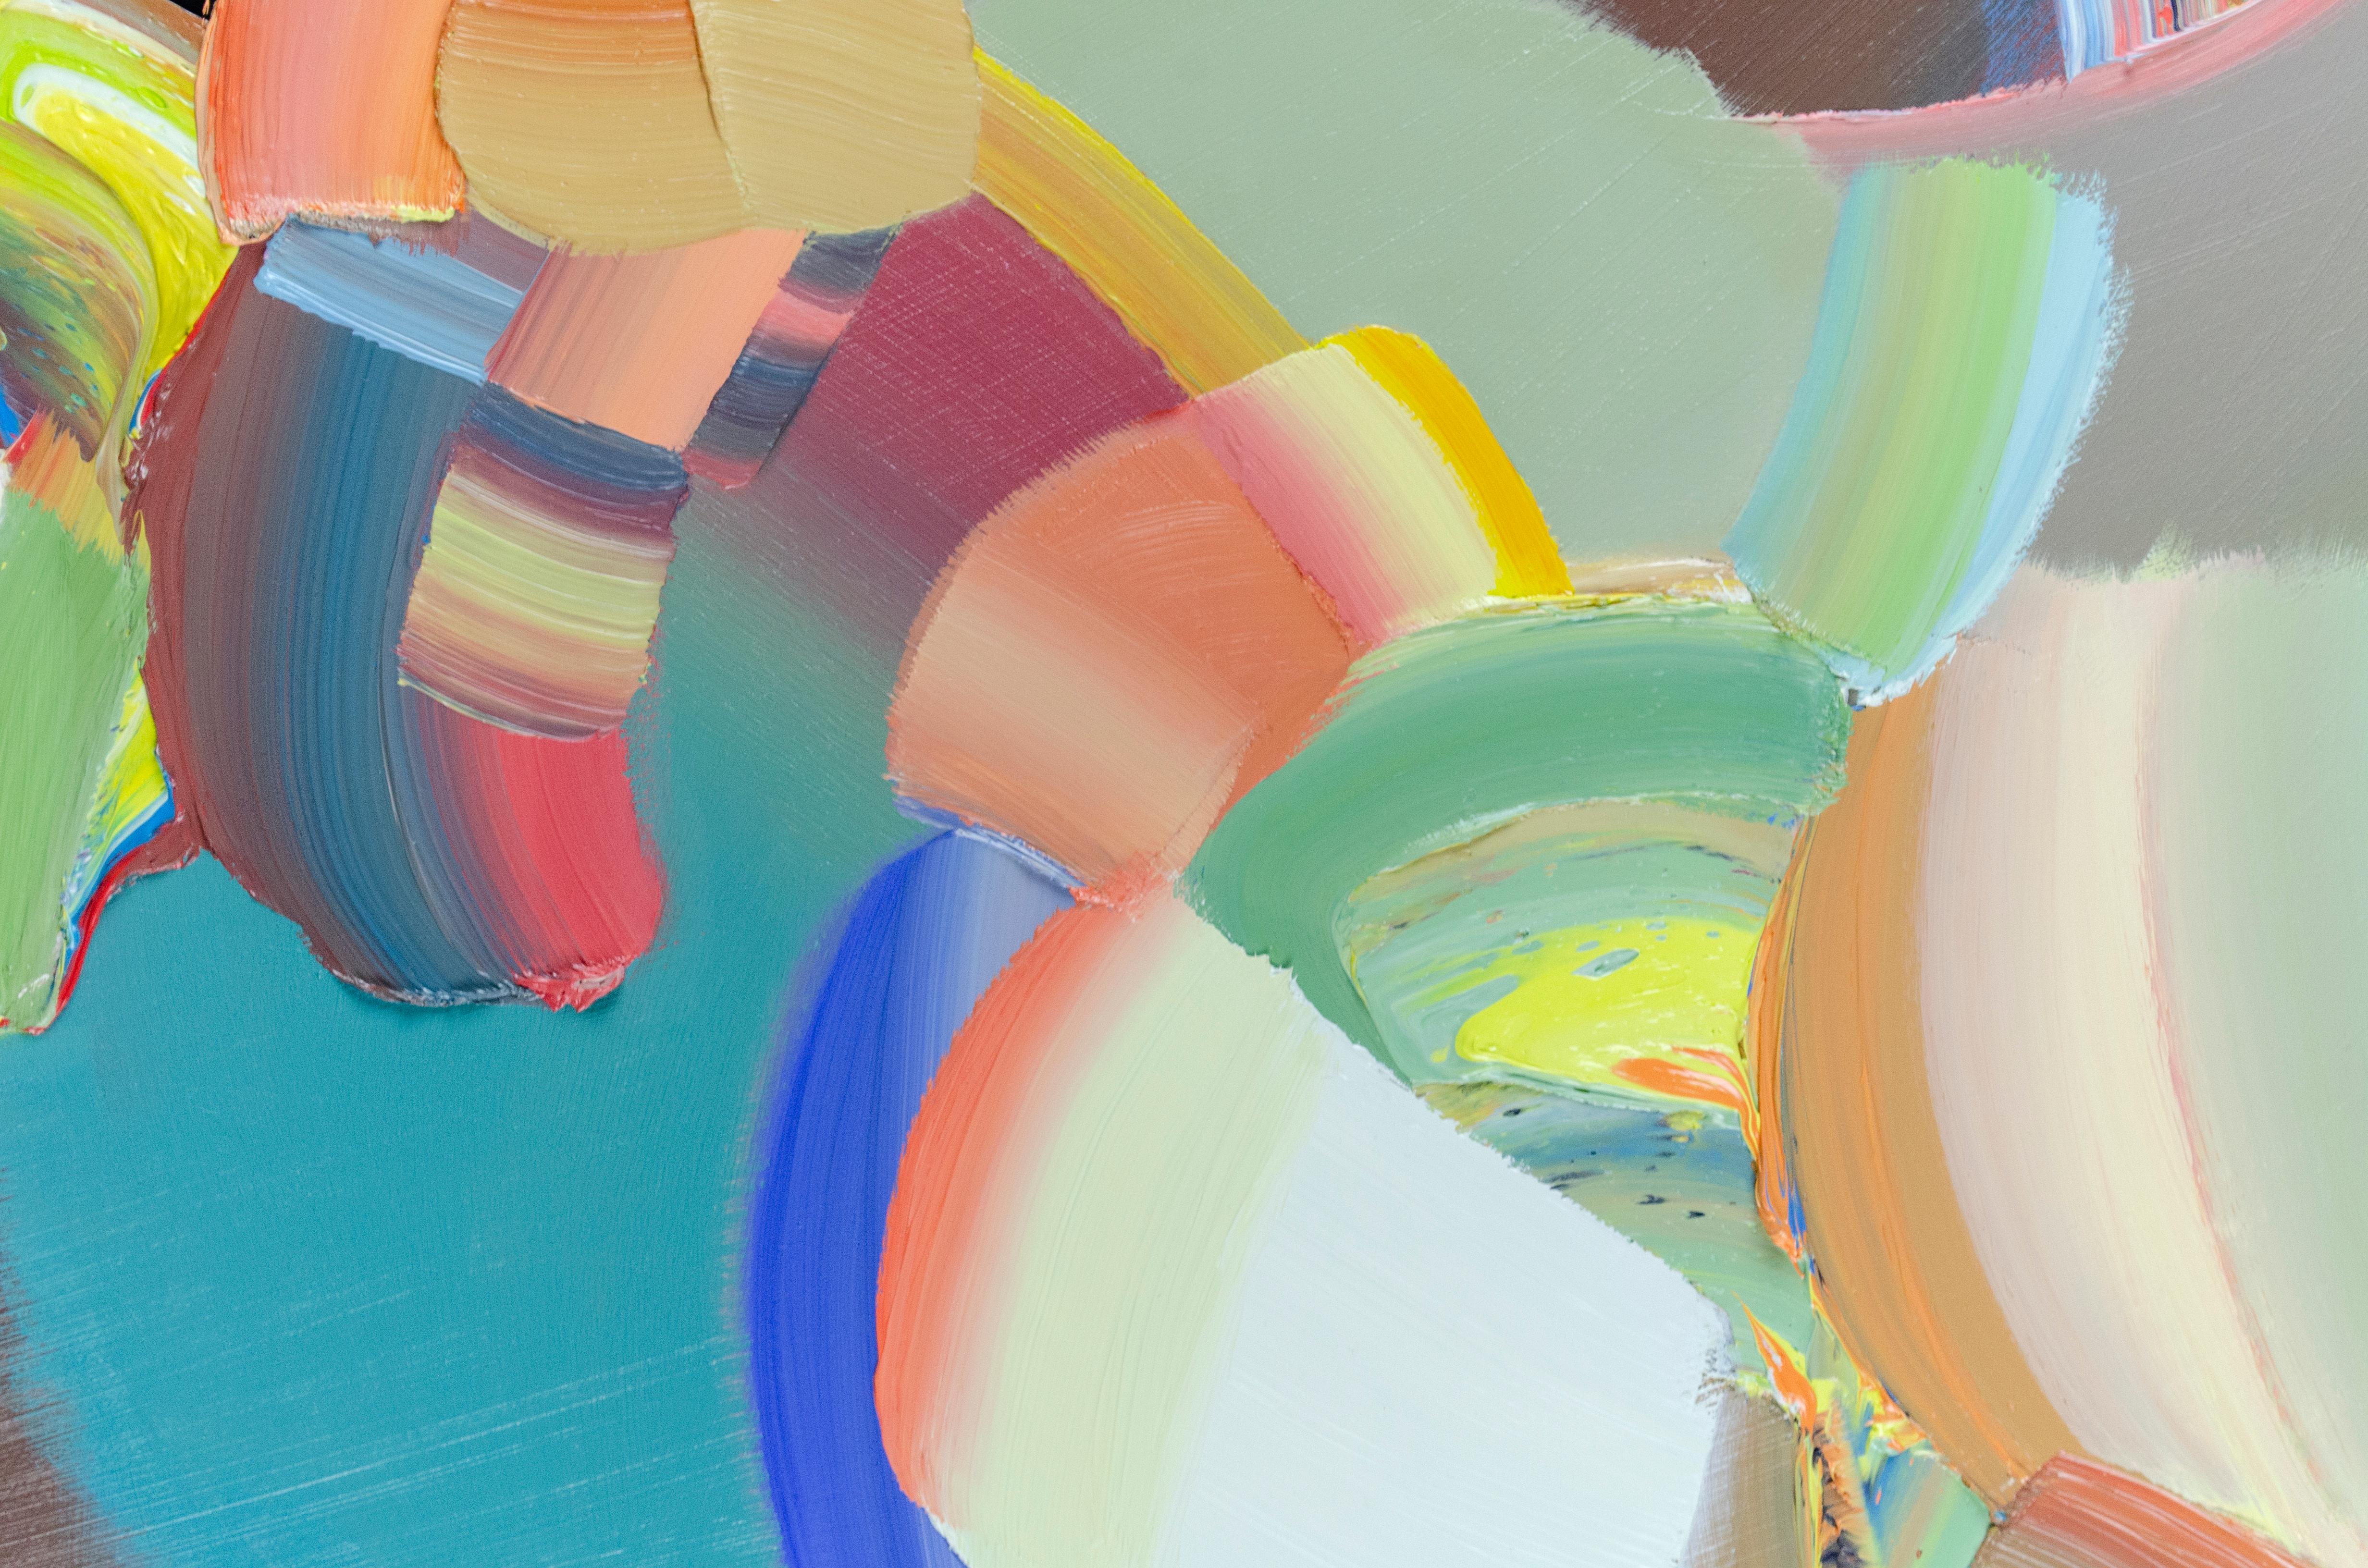 By letting go of representational imagery and leaning into abstraction, Texas- based artist Trey Egan delights in the pure properties of paint. Displaying a wide spectrum of hues with surface variations ranging from smooth to lusciously gooey, his